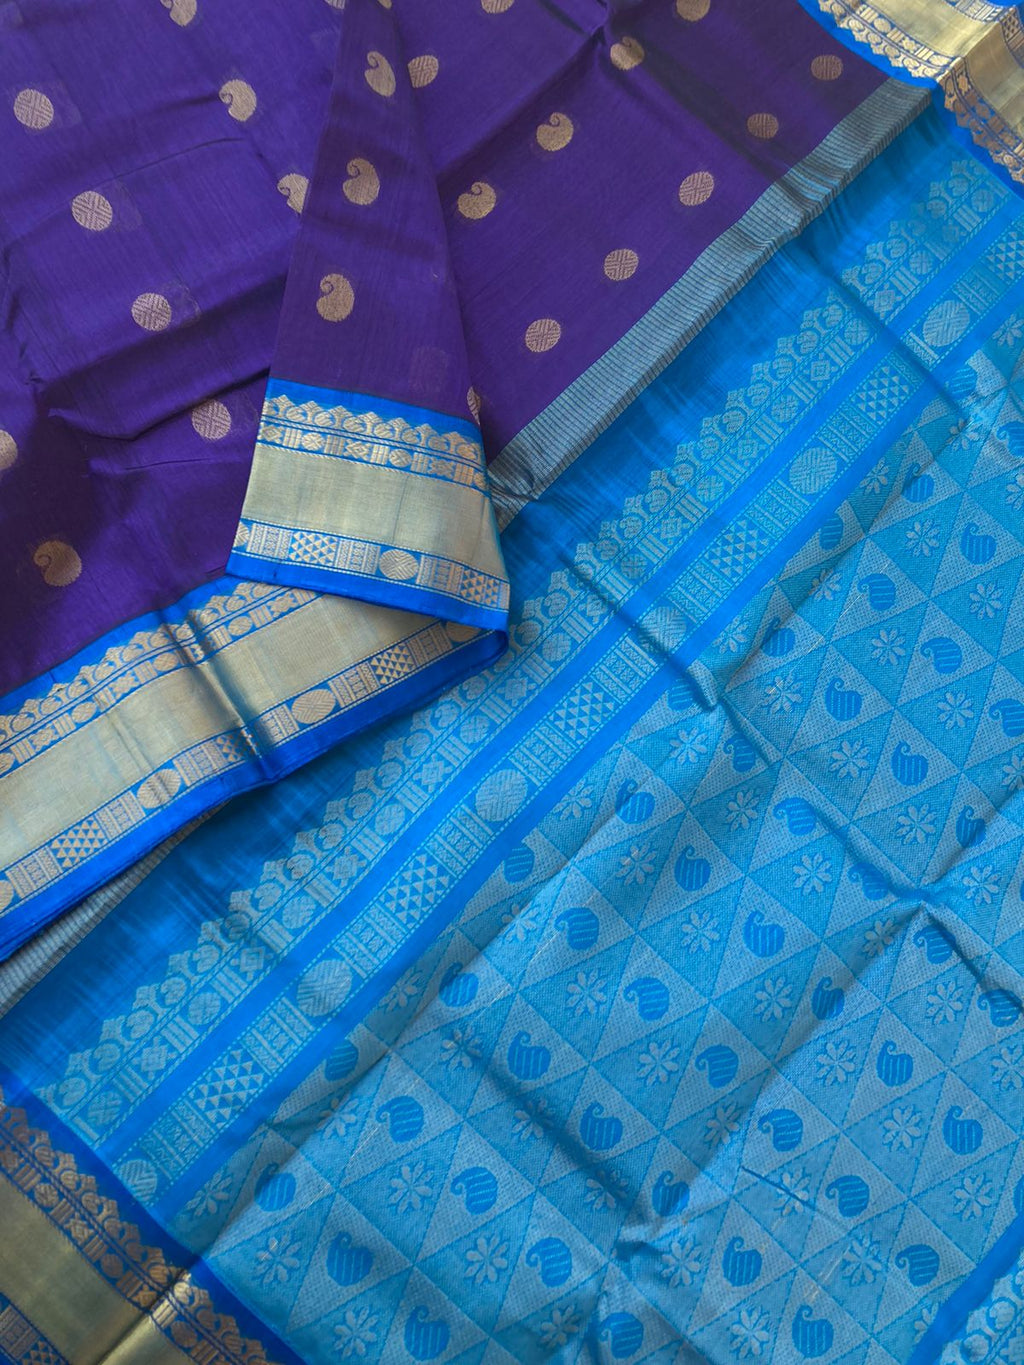 Korvai Silk Cottons - blue on blue